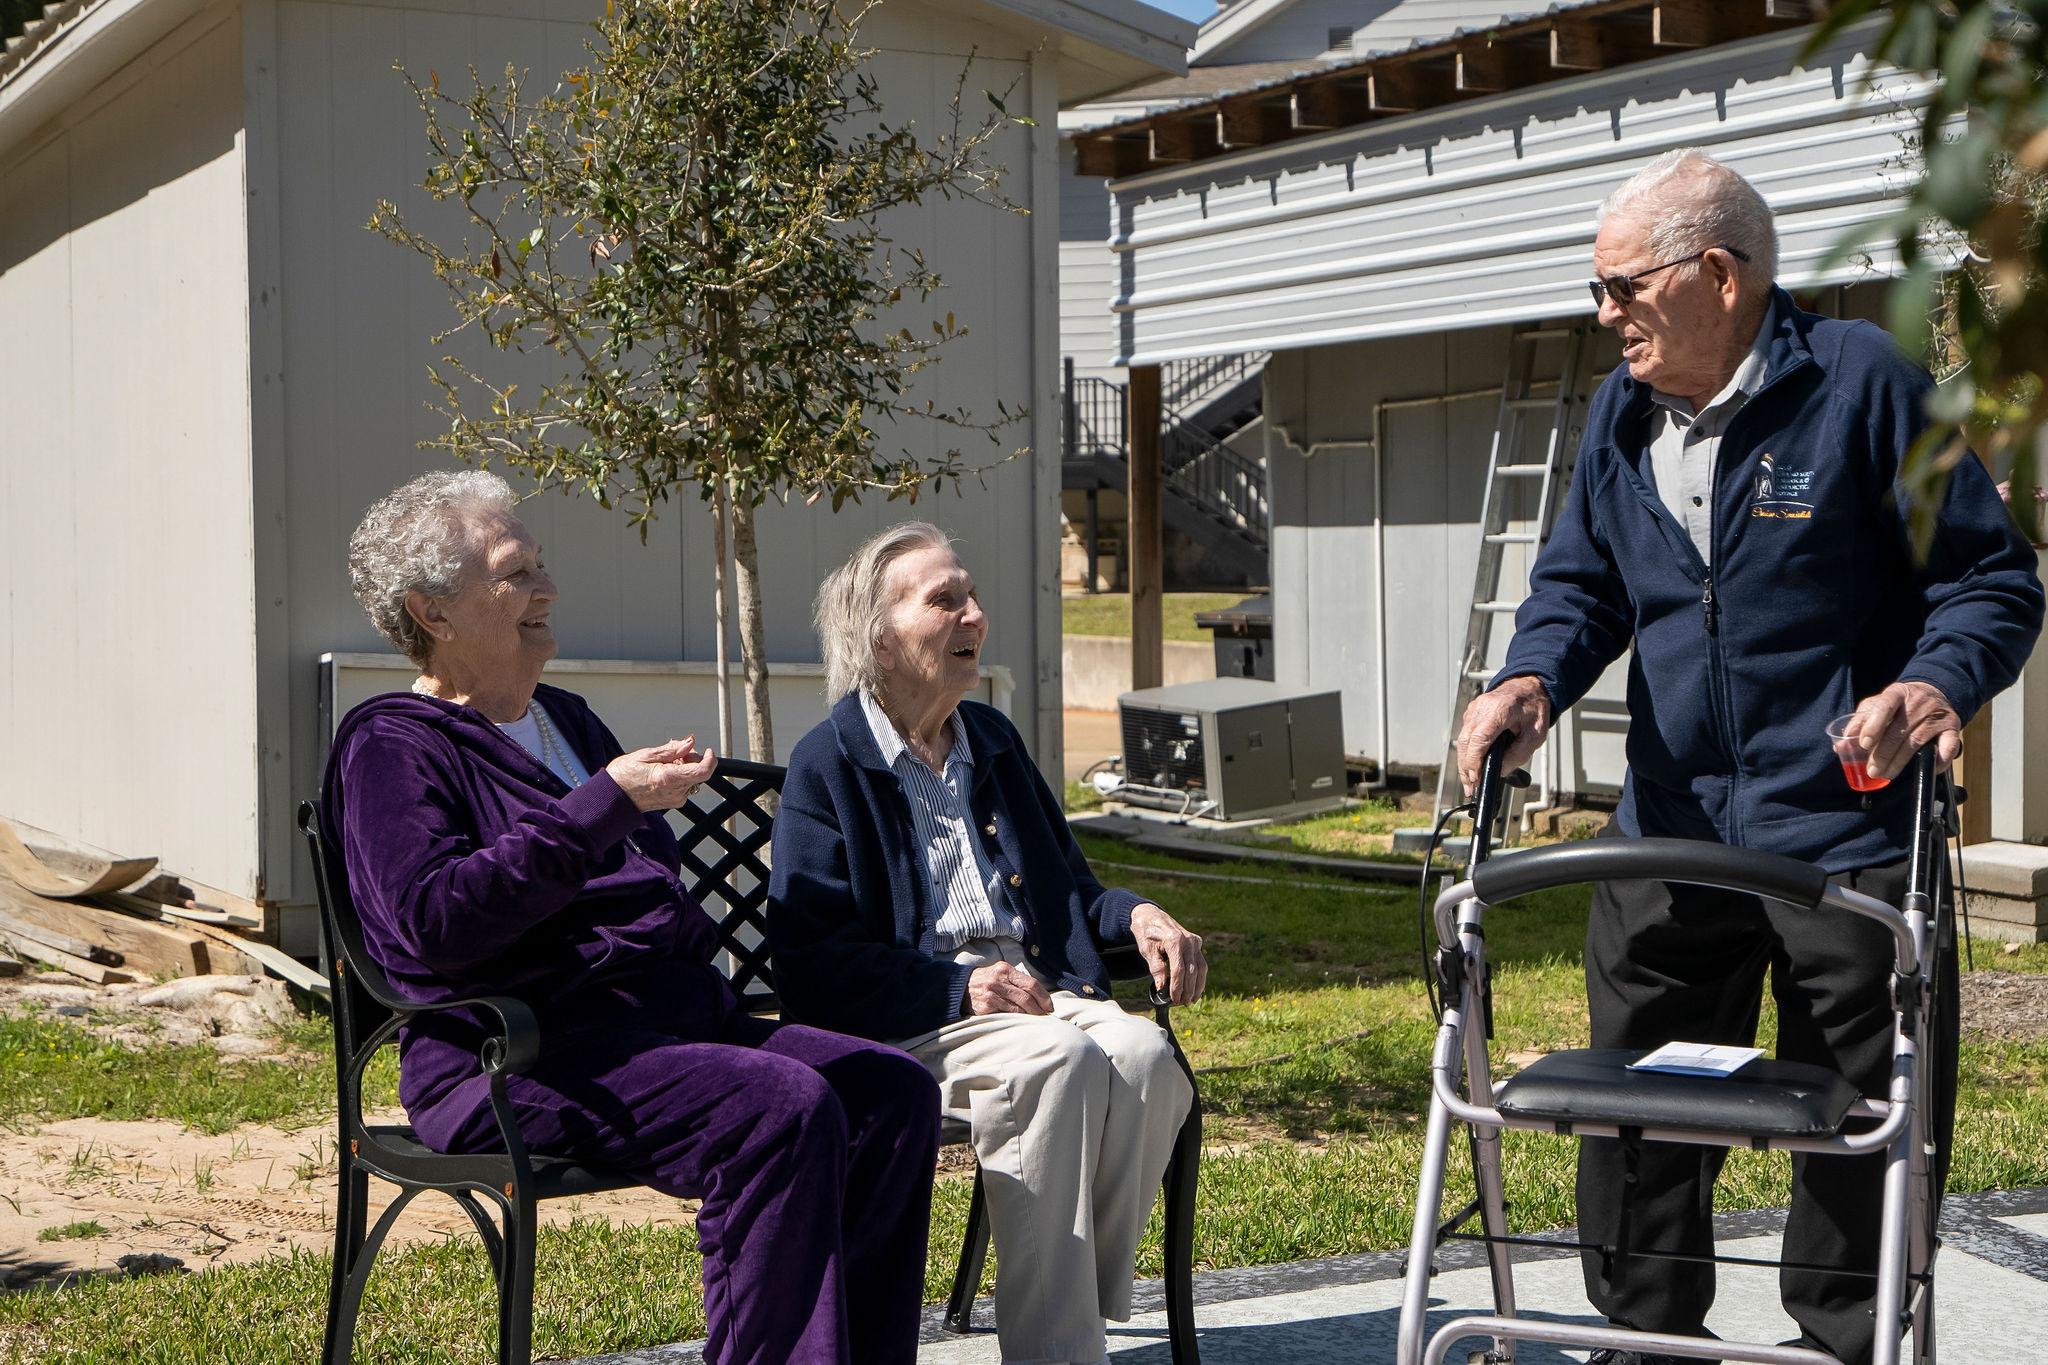 seniors in a community enjoying each other's company outside